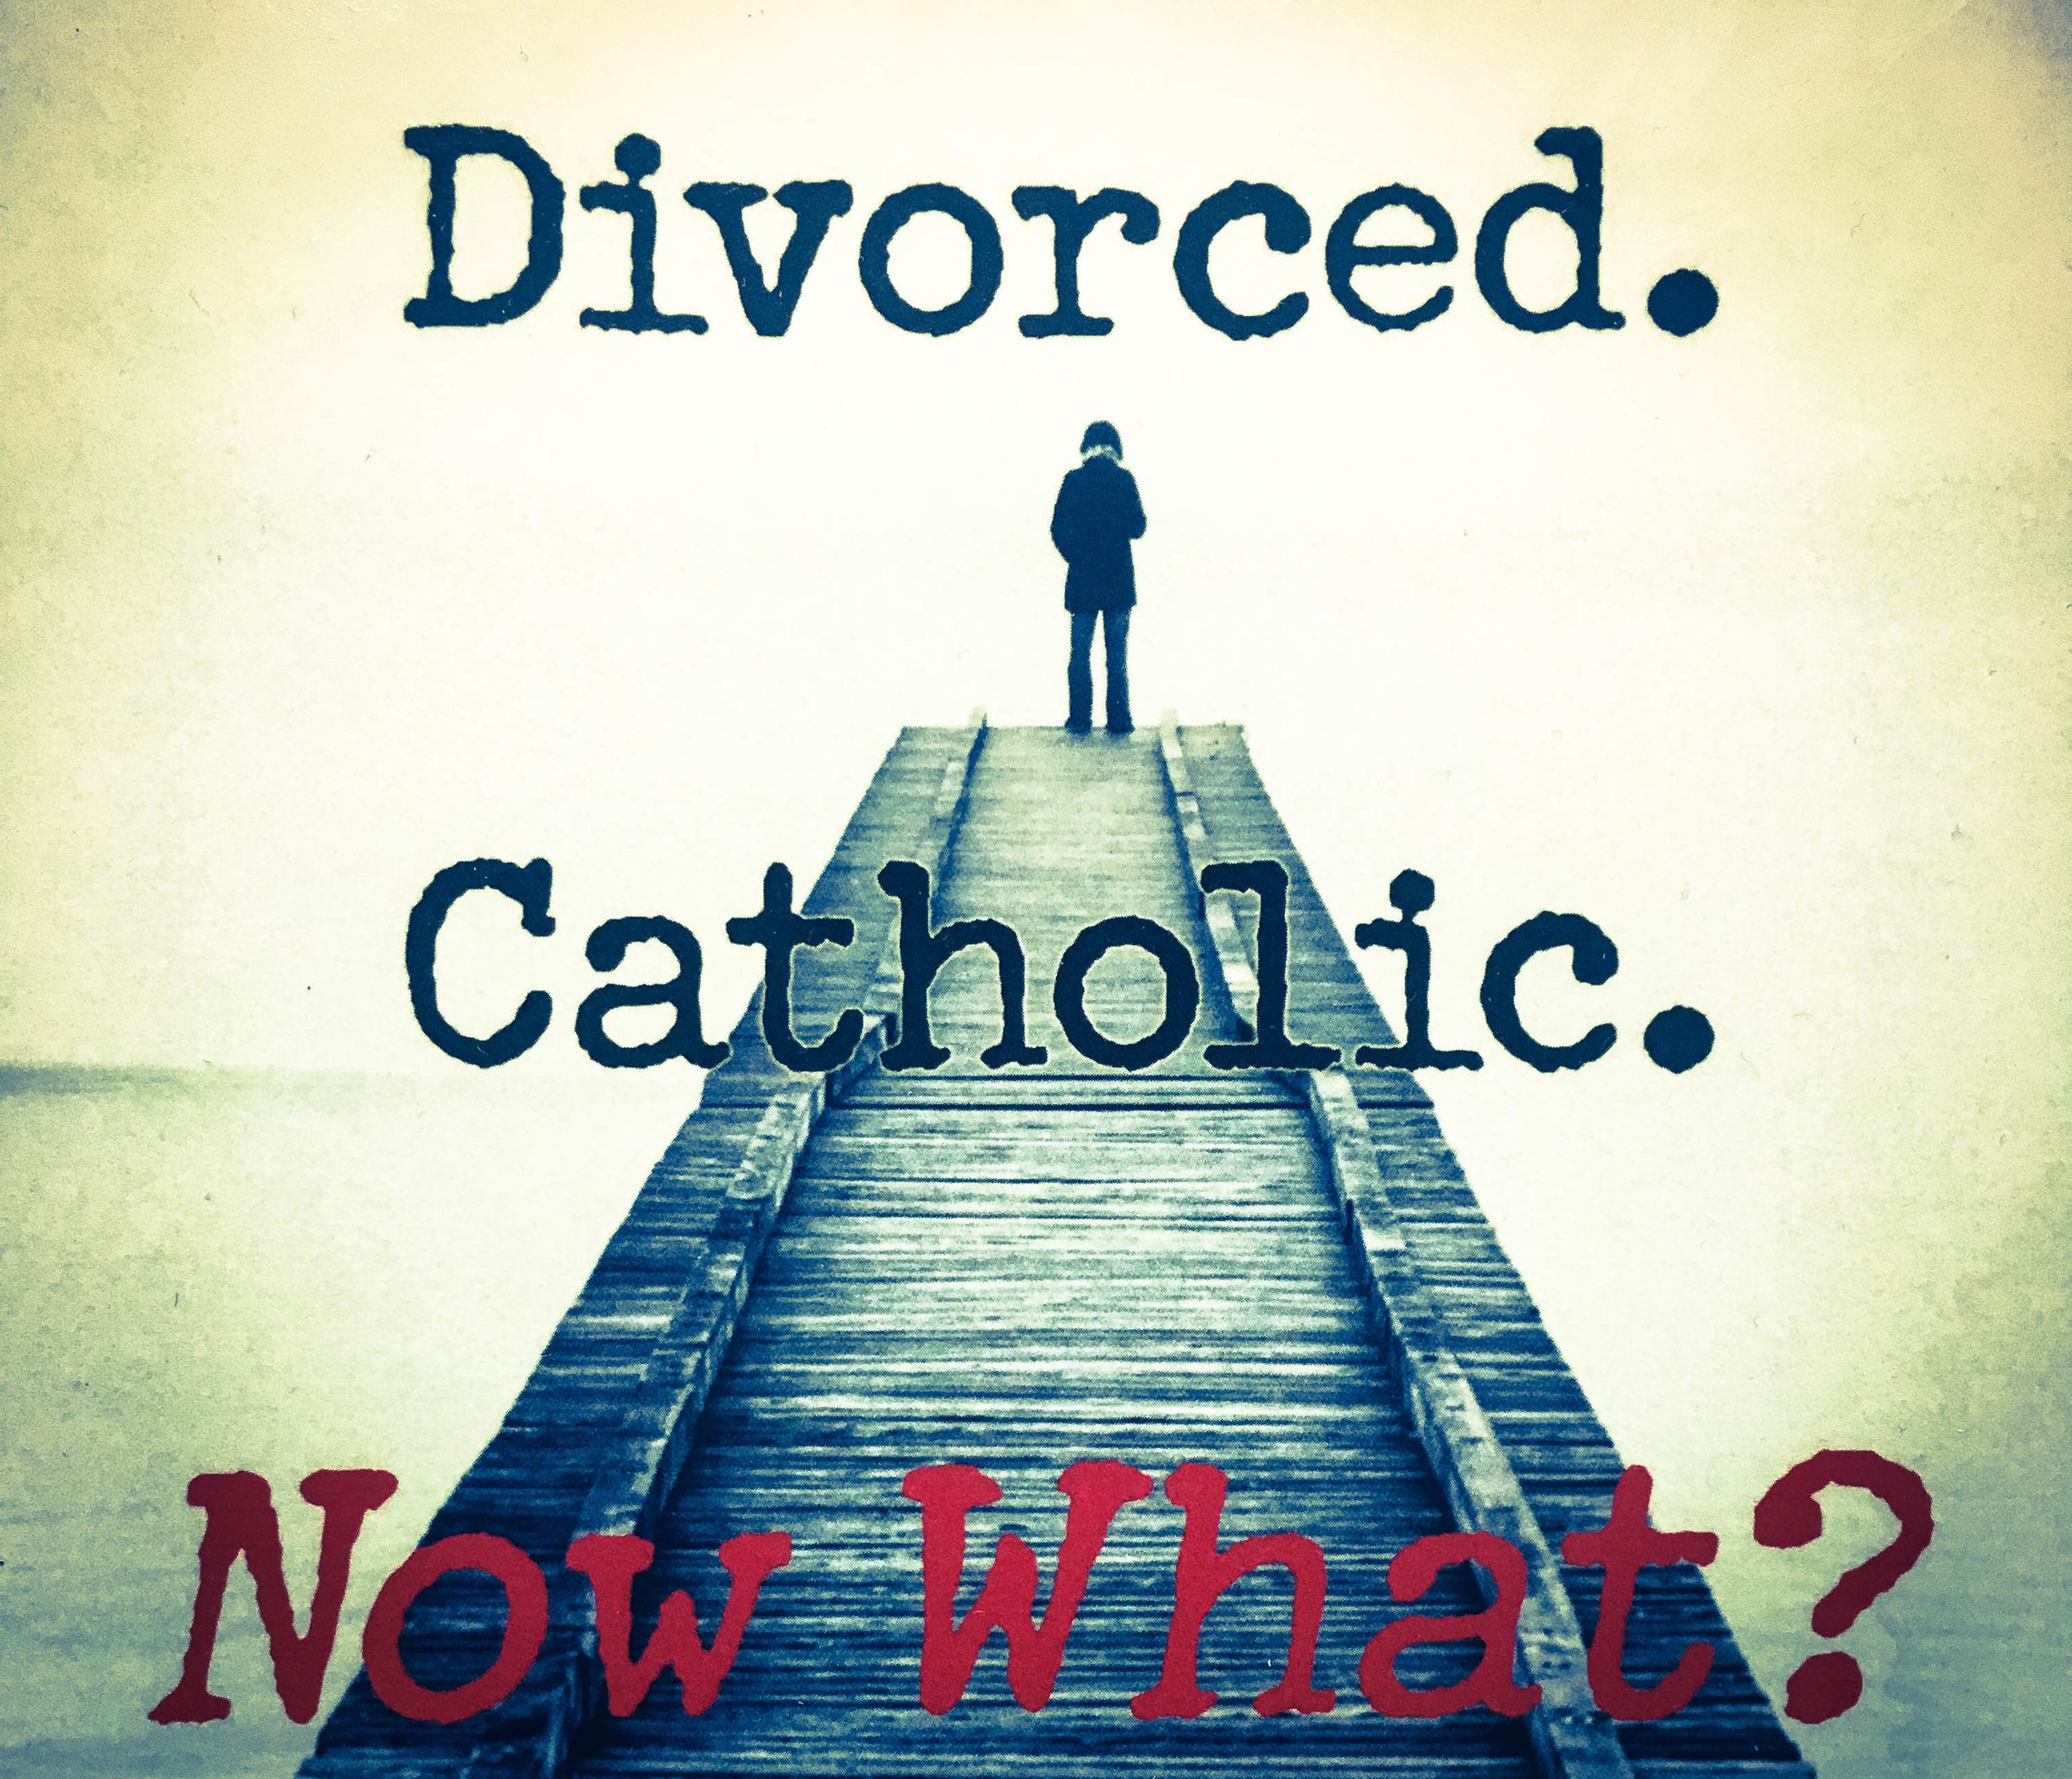 Divorced. Catholic. Now What?